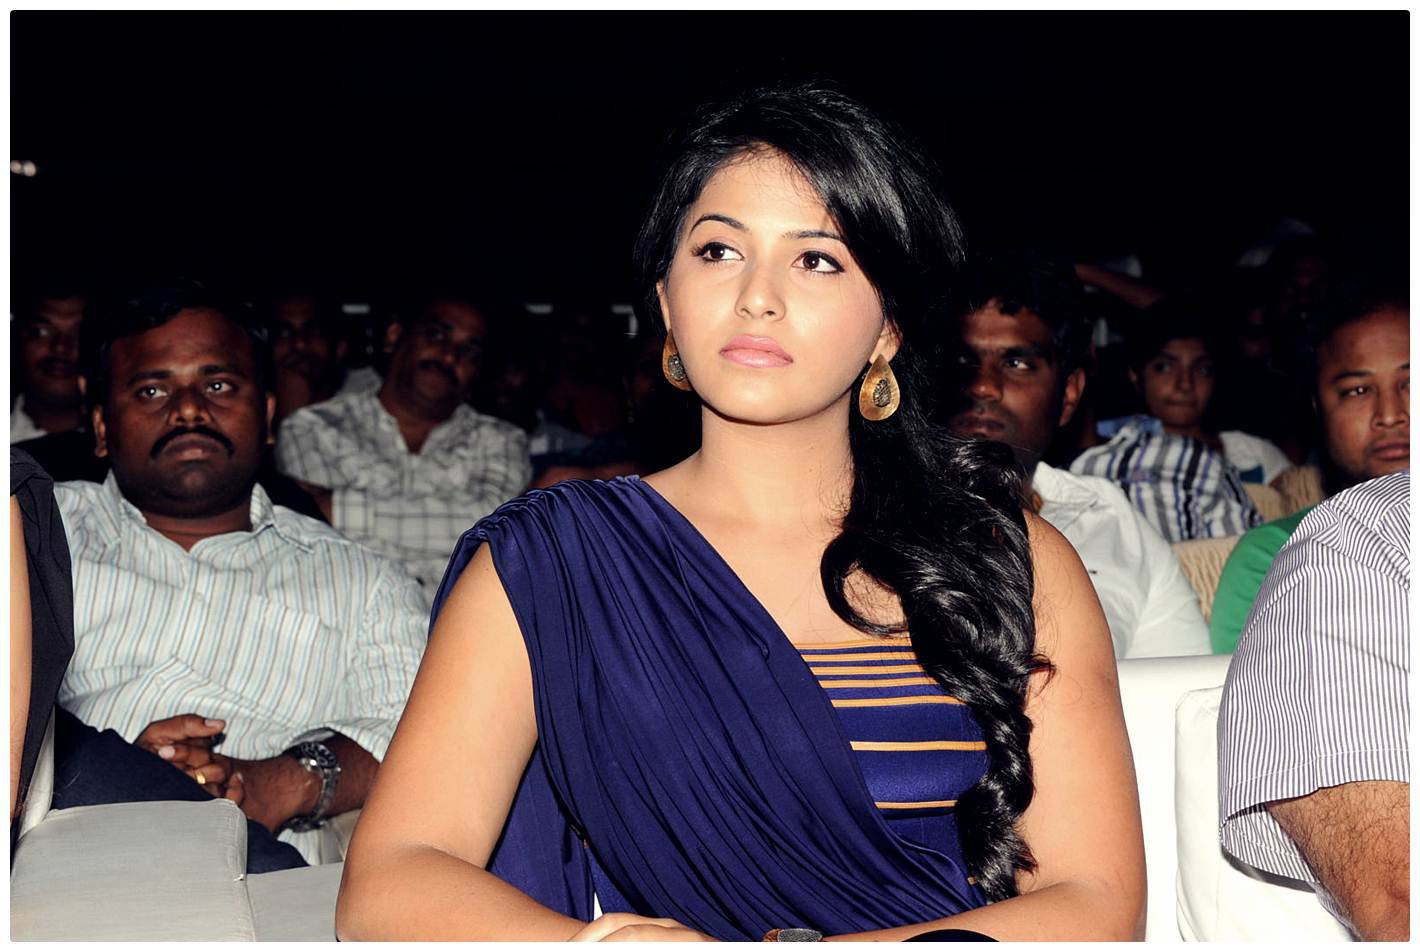 Anjali at Balupu Audio Release Function Photos | Picture 470878